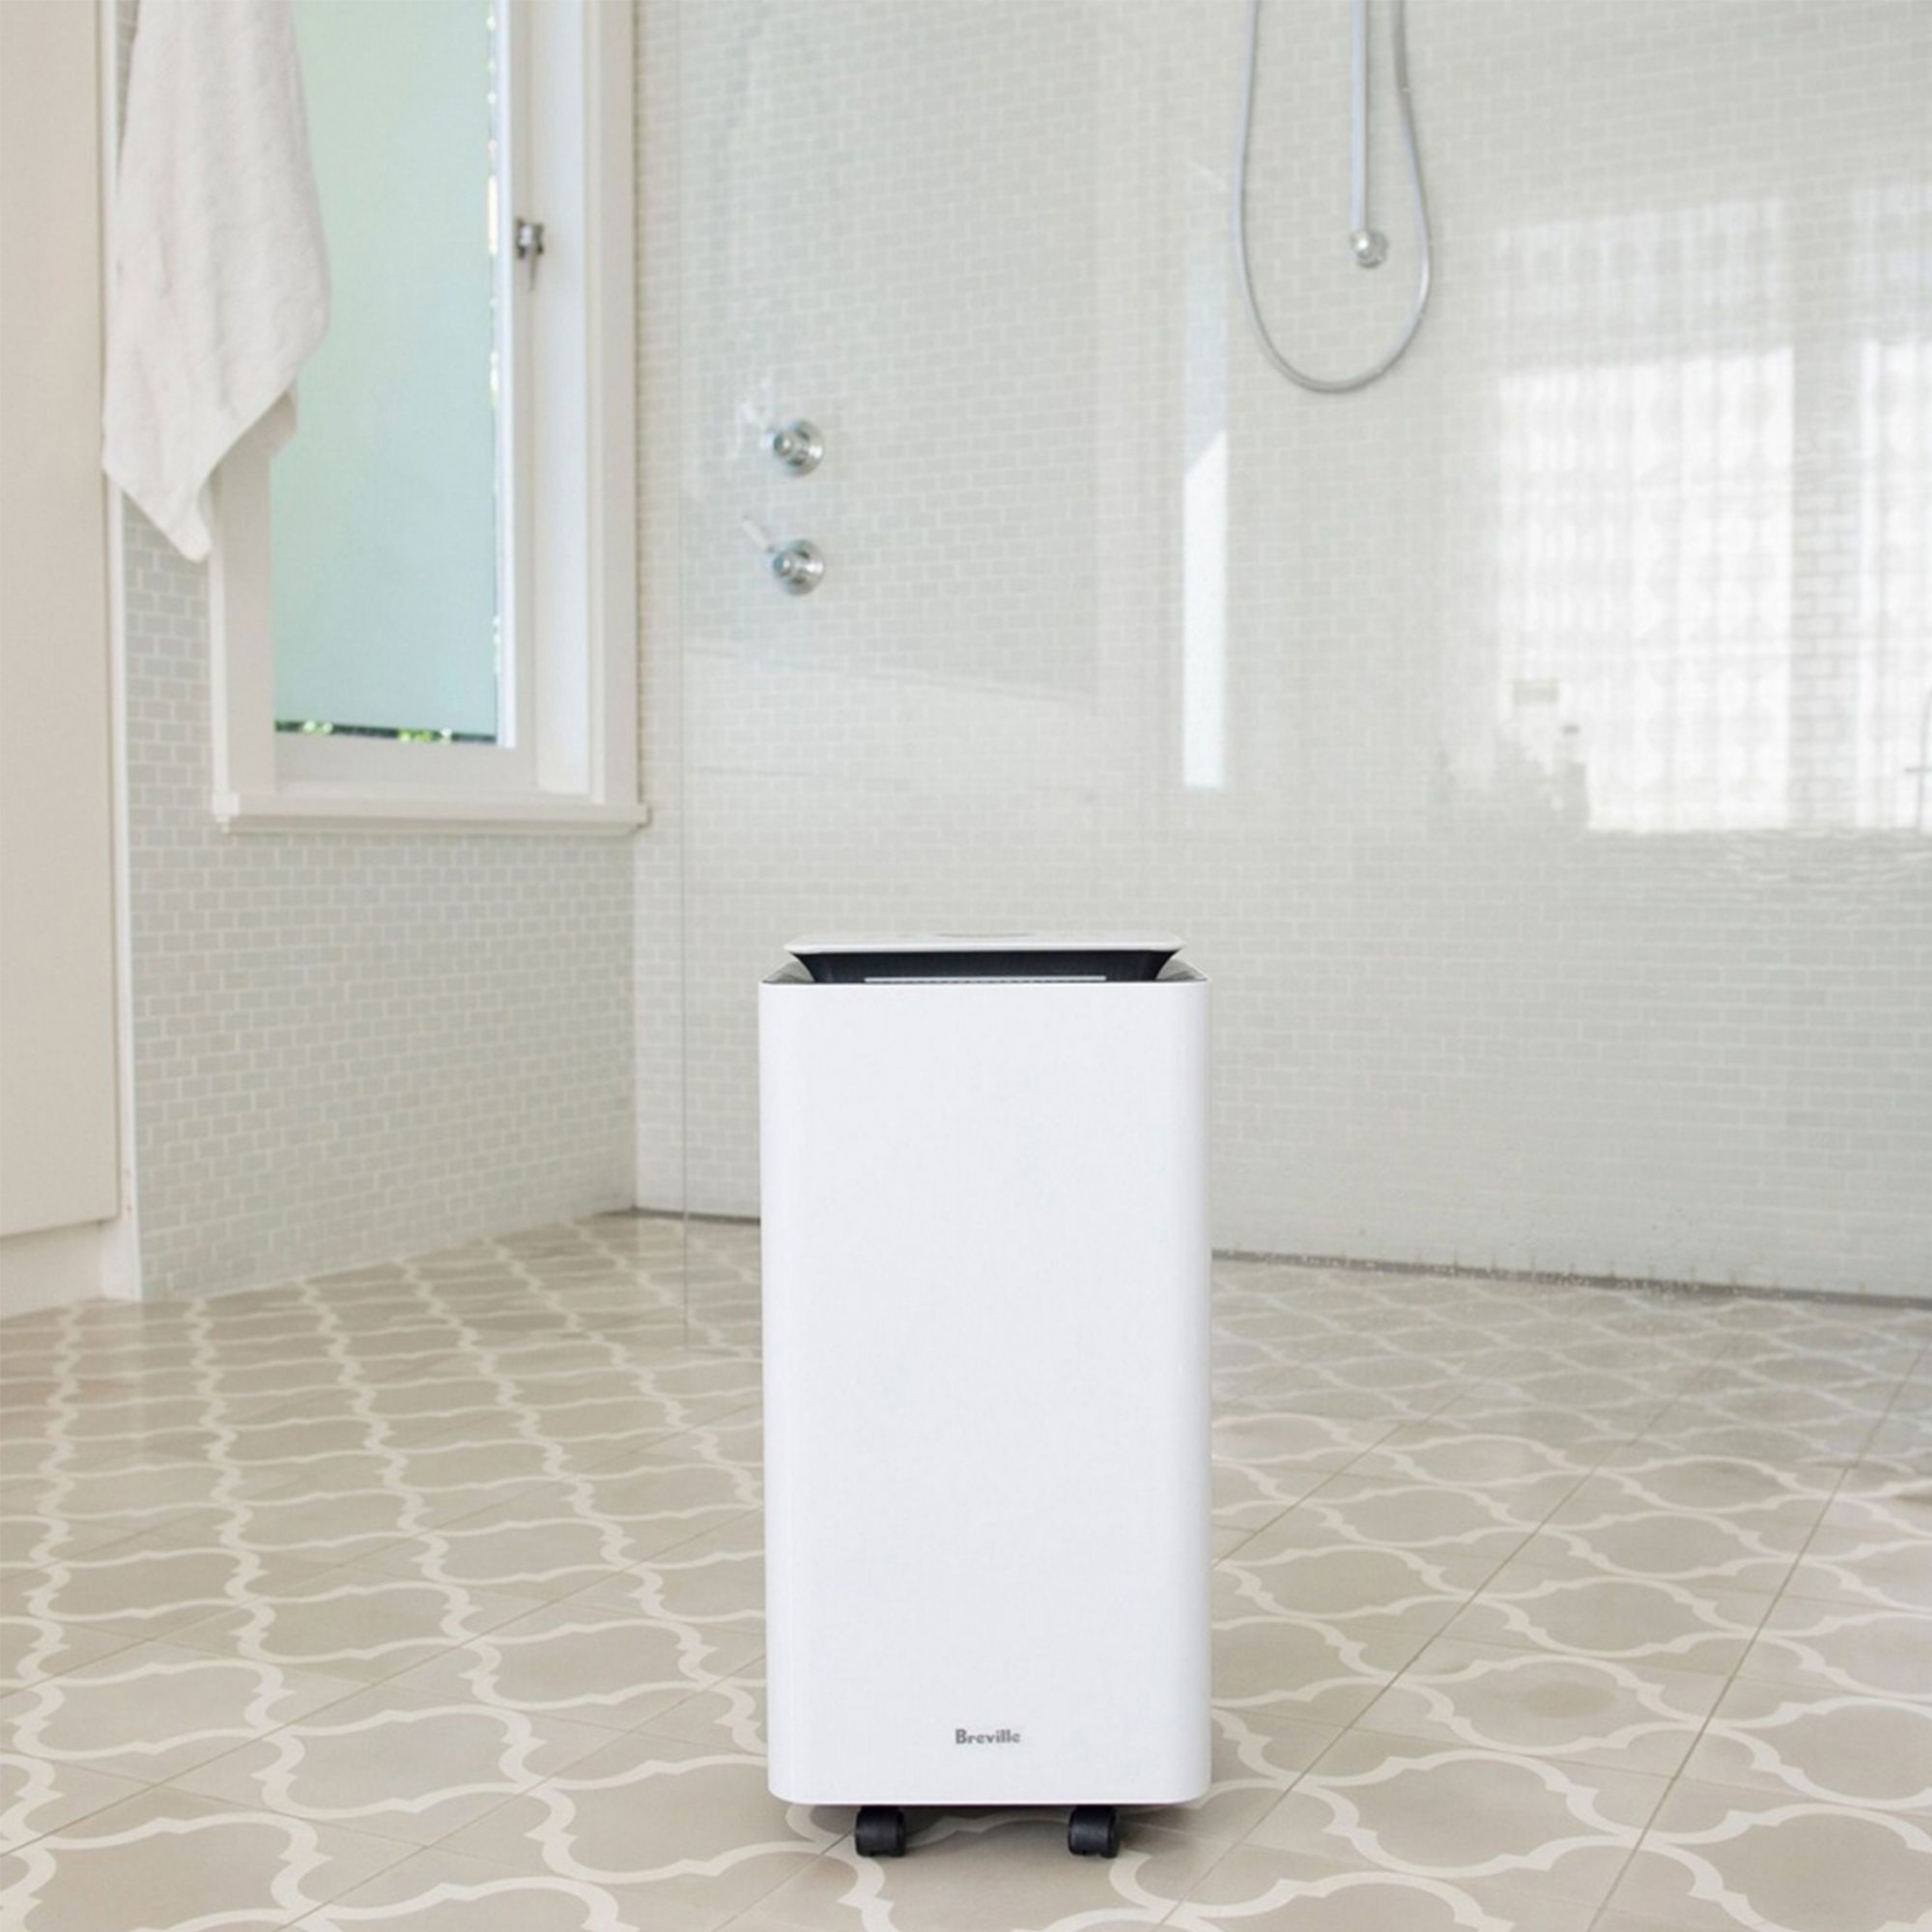 Breville The Smart Dry Dehumidifier Image 2